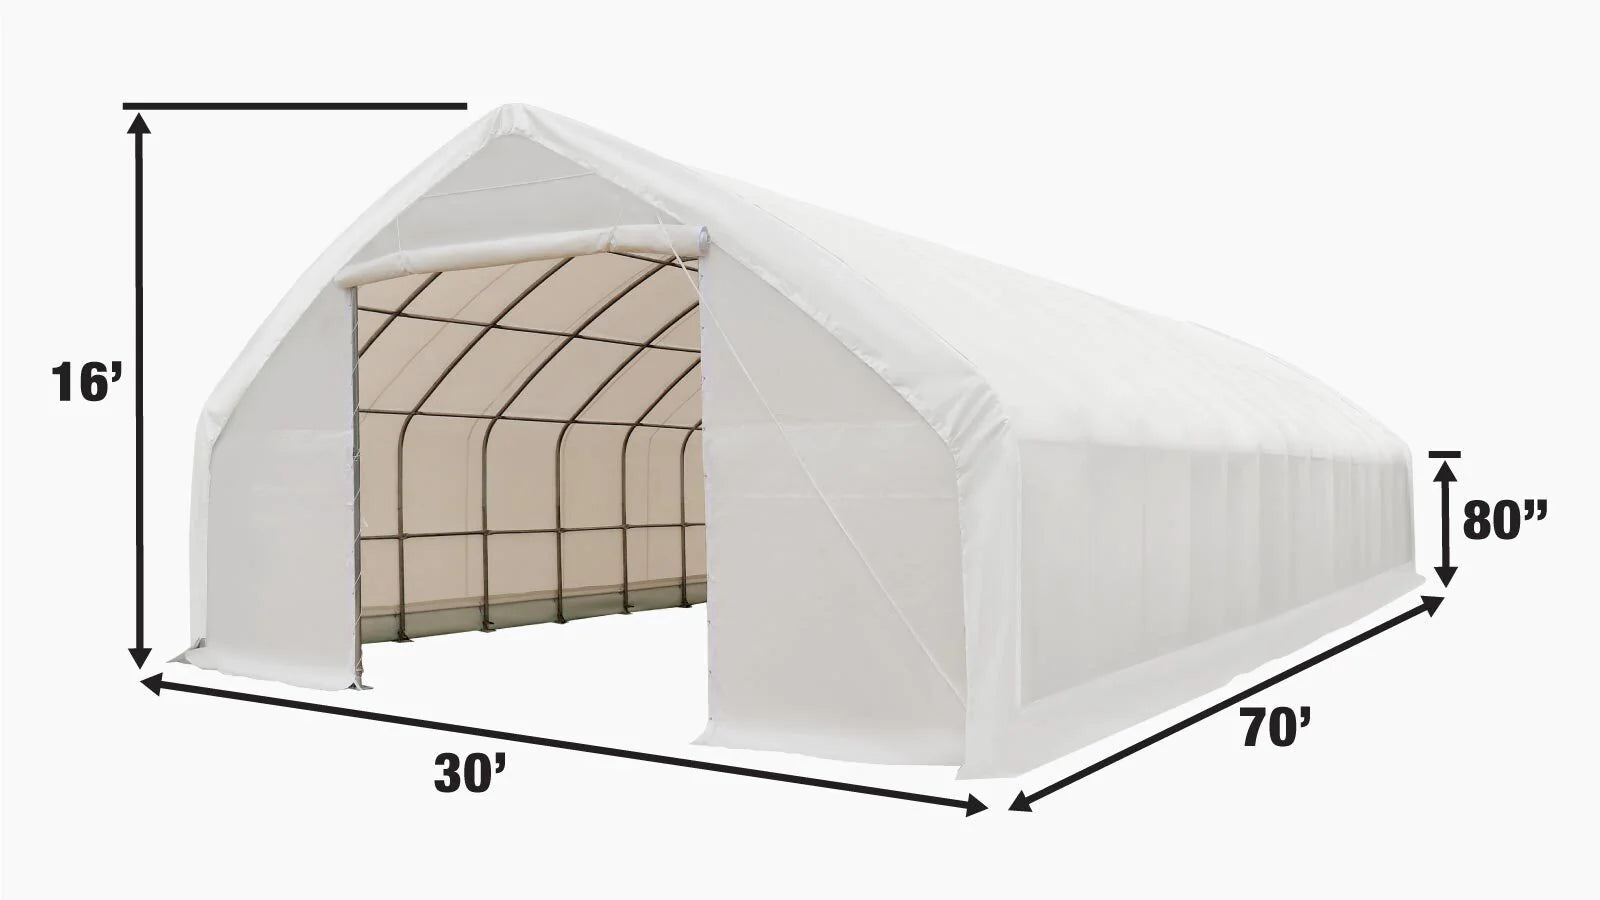 TMG Industrial 30' x 70' Straight Wall Peak Ceiling Storage Shelter with Heavy Duty 11 oz PE Cover & Drive Through Doors, TMG-ST3070E(Previously ST3070)-specifications-image